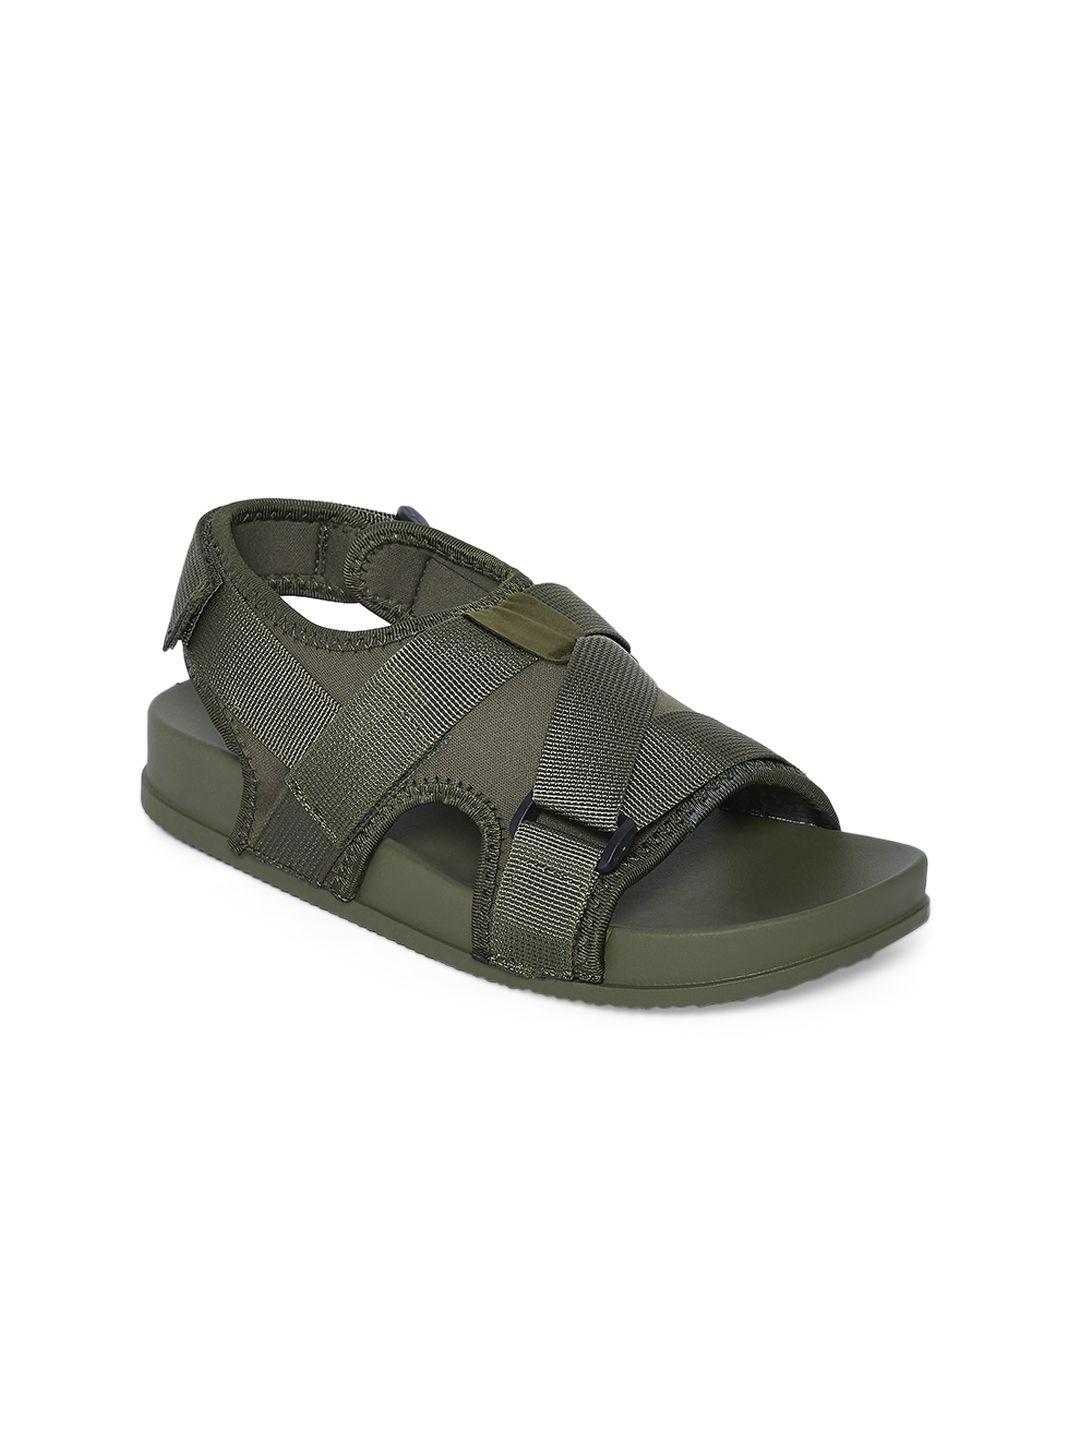 forever-glam-by-pantaloons-women-olive-green-open-toe-flats